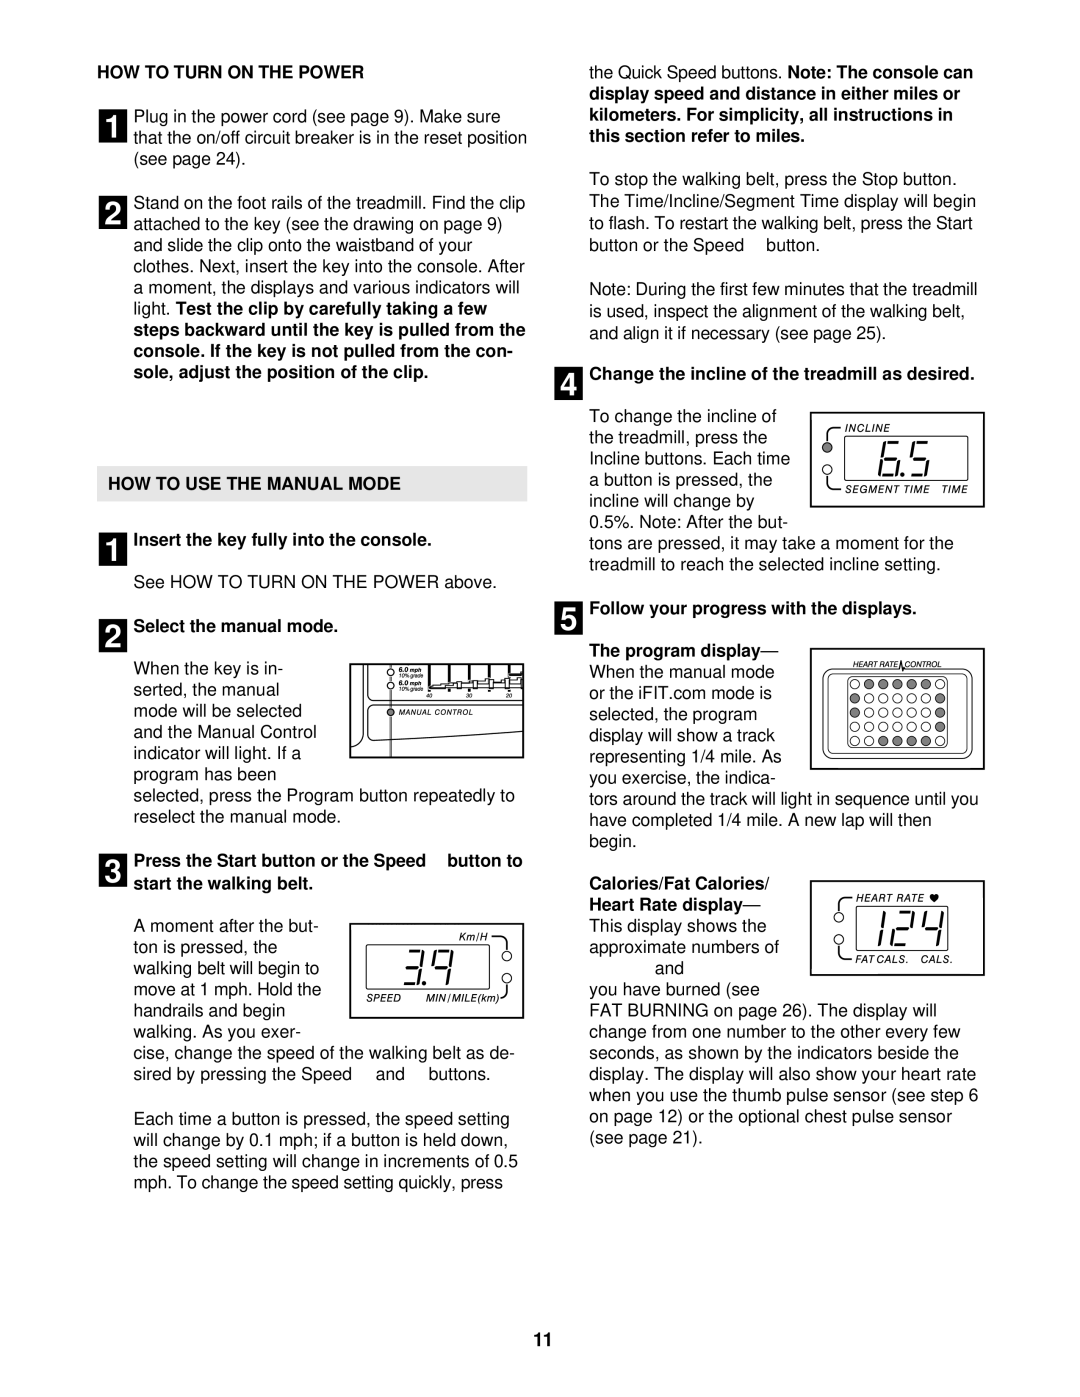 ProForm PFTL59822 user manual HOW to Turn on the Power, HOW to USE the Manual Mode 